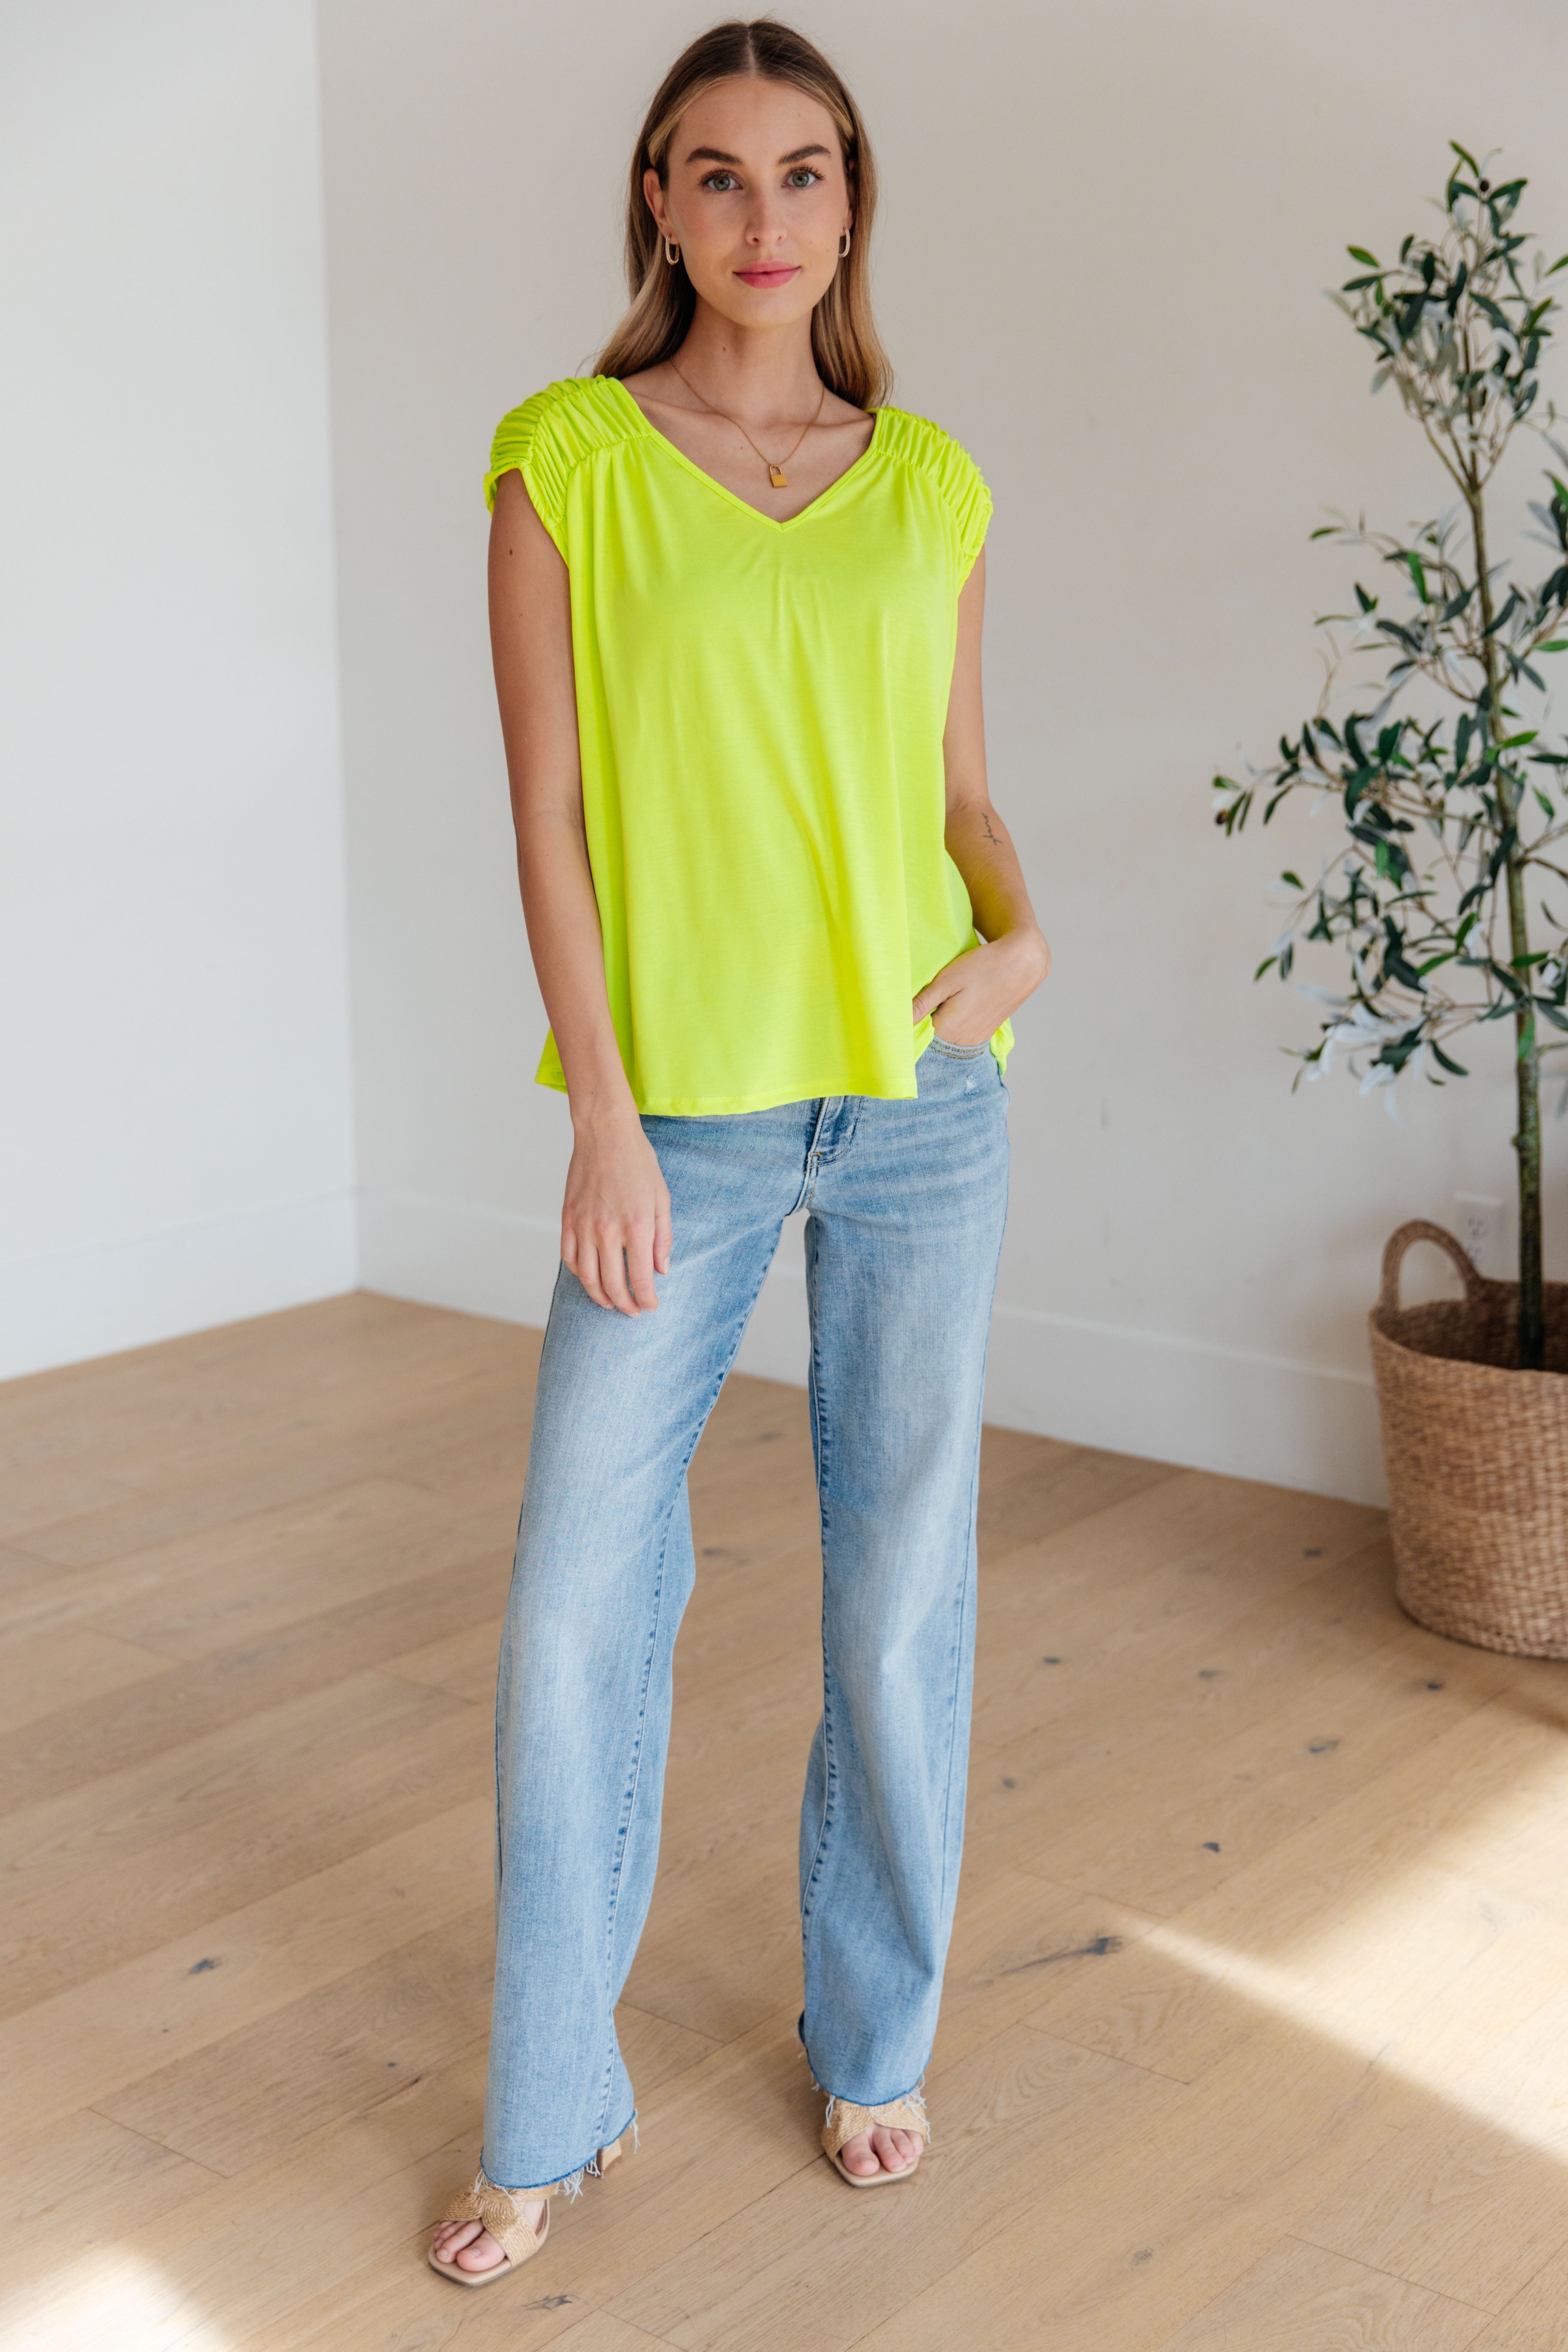 Ruched Cap Sleeve Top in Neon Green Ave Shops